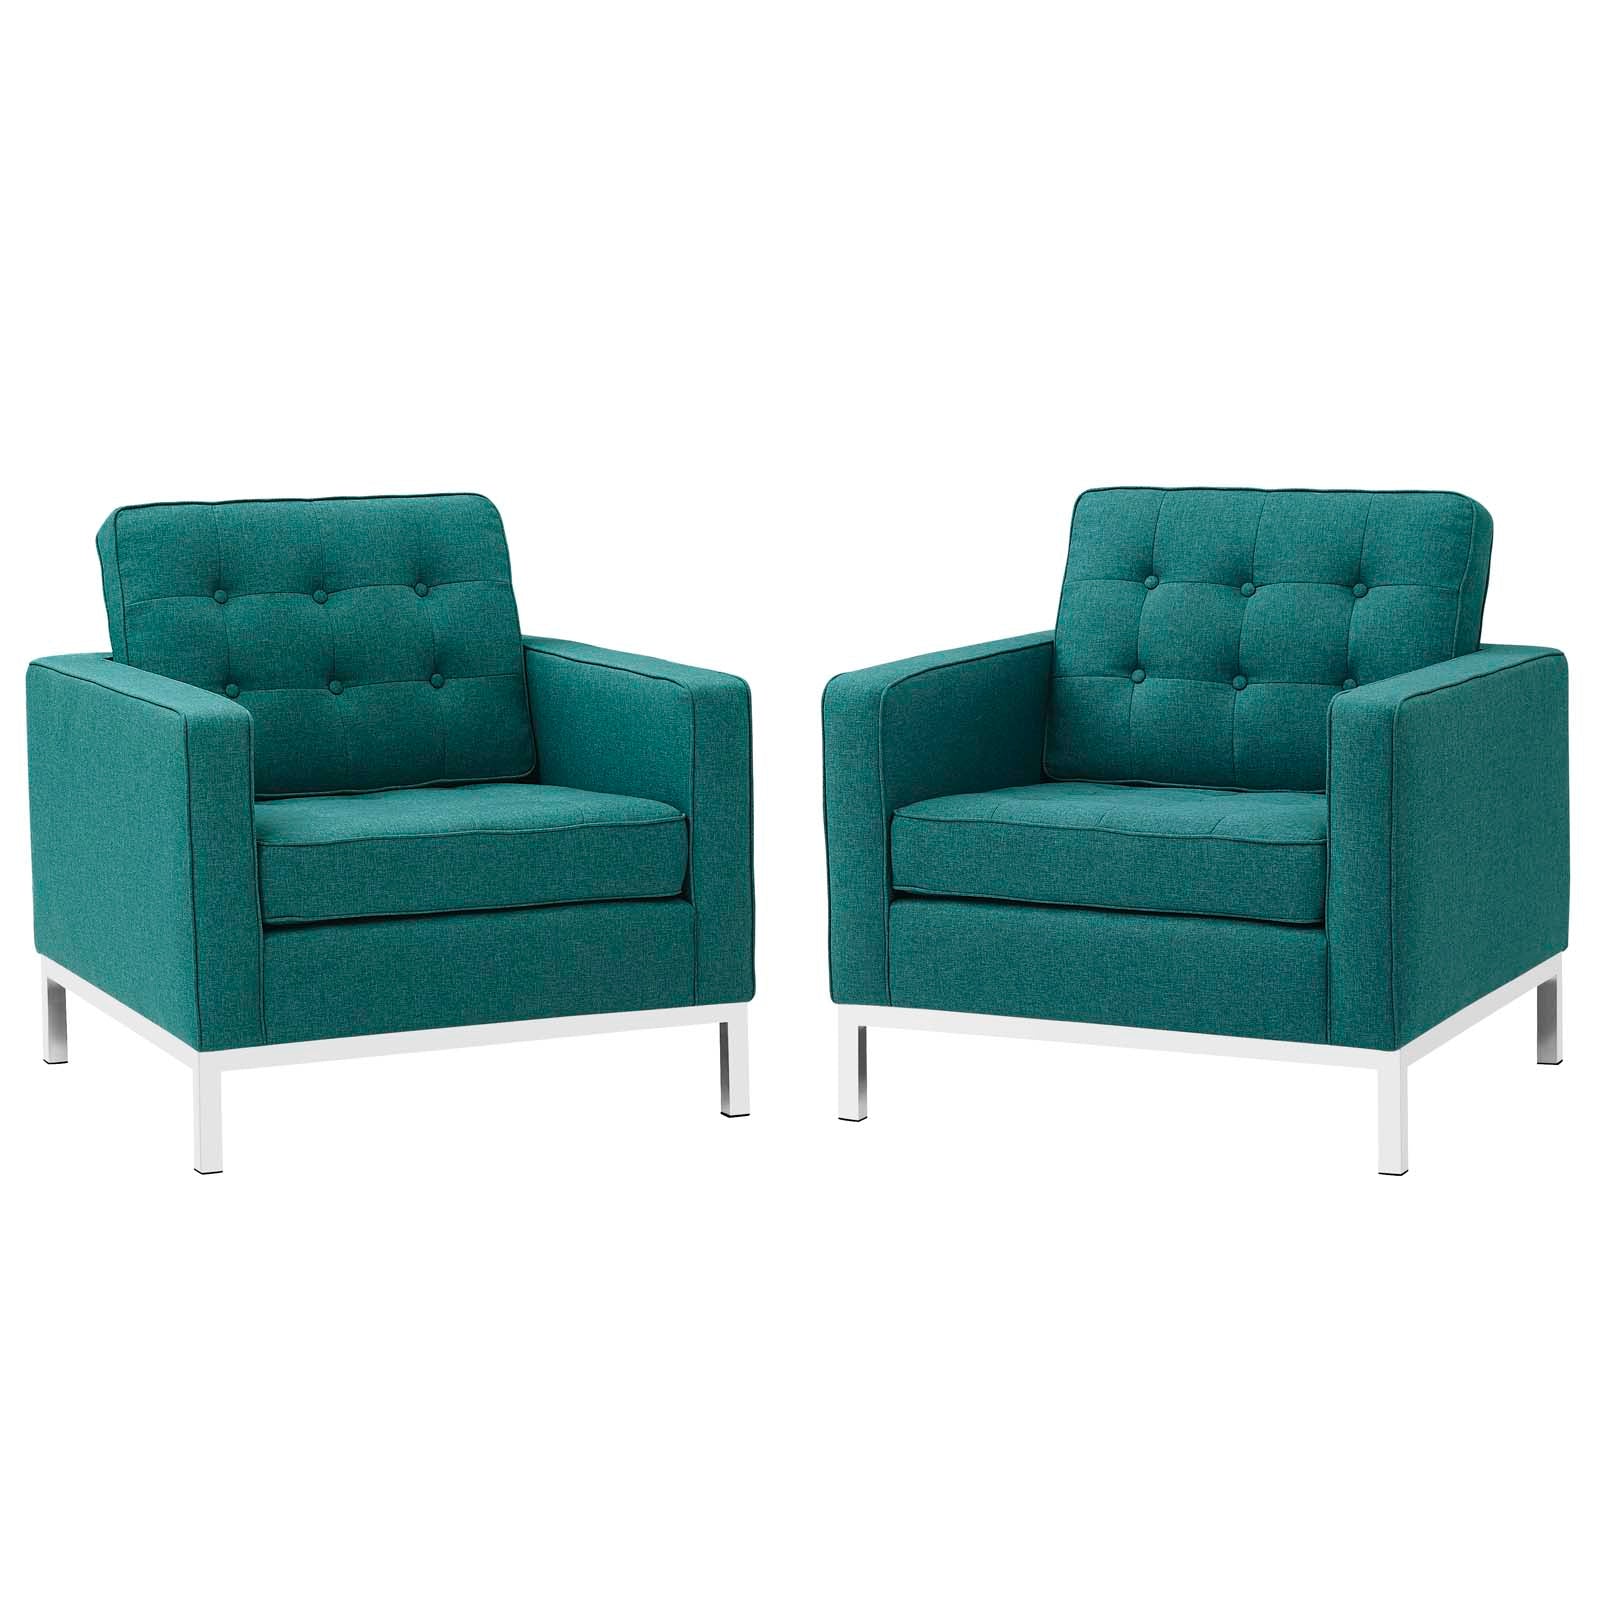 Loft Armchairs Upholstered Fabric Set of 2 - East Shore Modern Home Furnishings